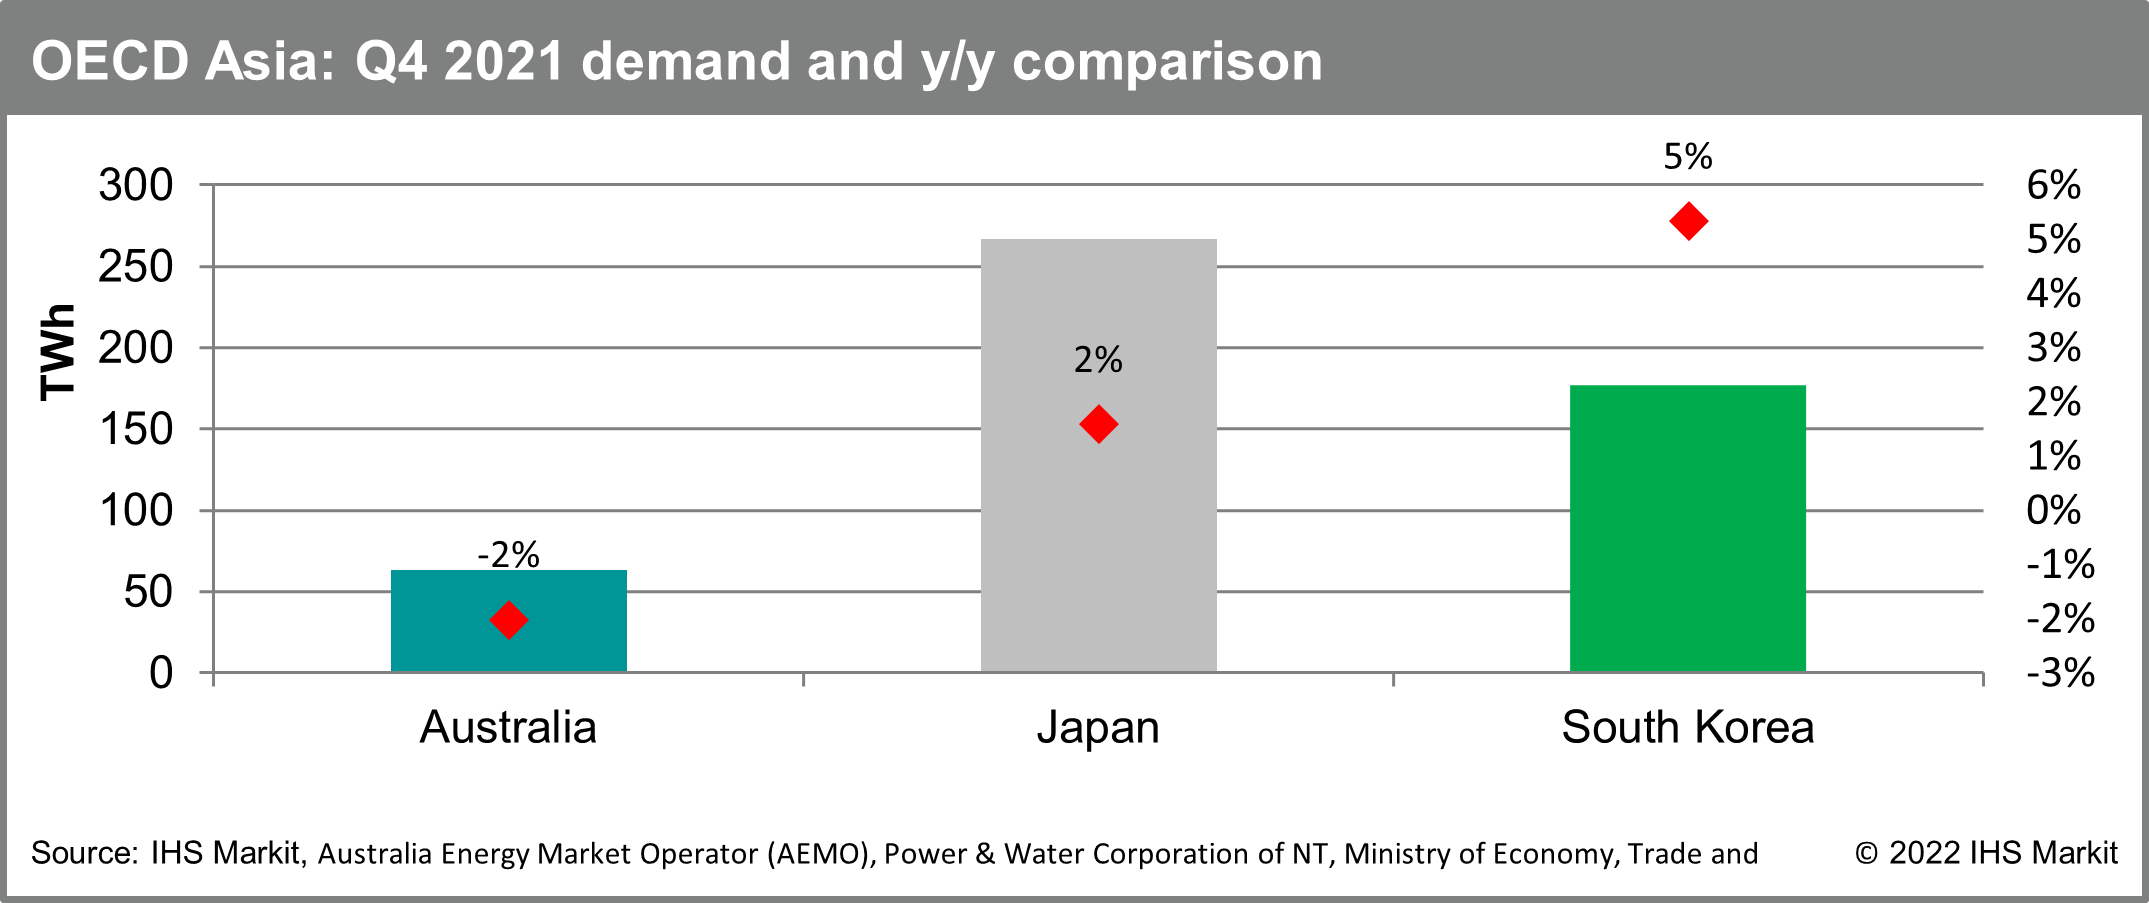 OECD Asia - Q4 2021 demand and y/y comparison